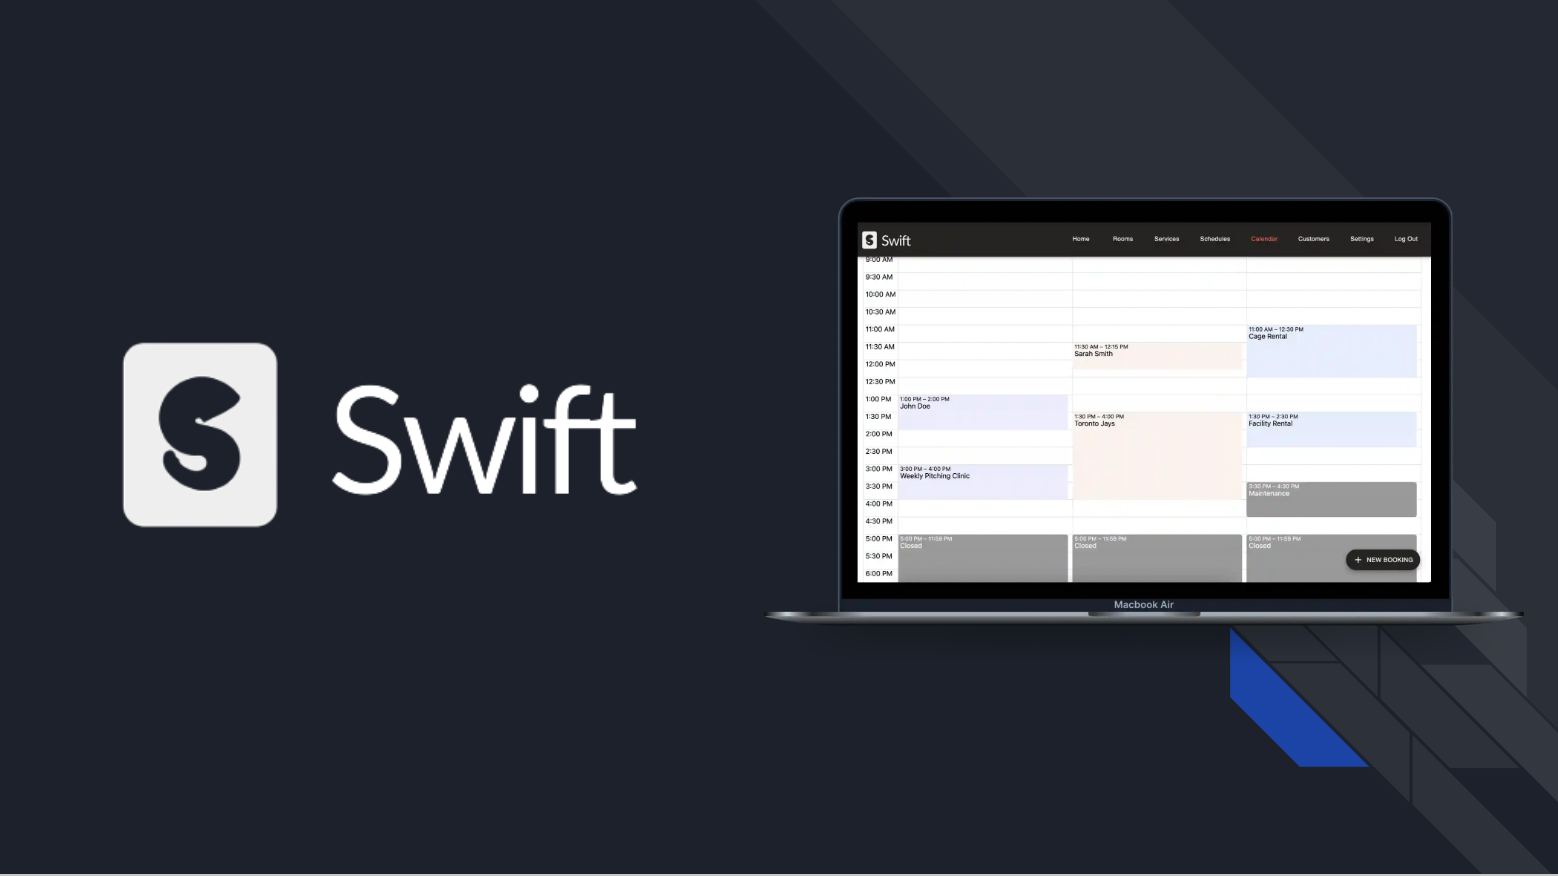 Meet Swift, the all-in-one platform to manage & grow your sports business